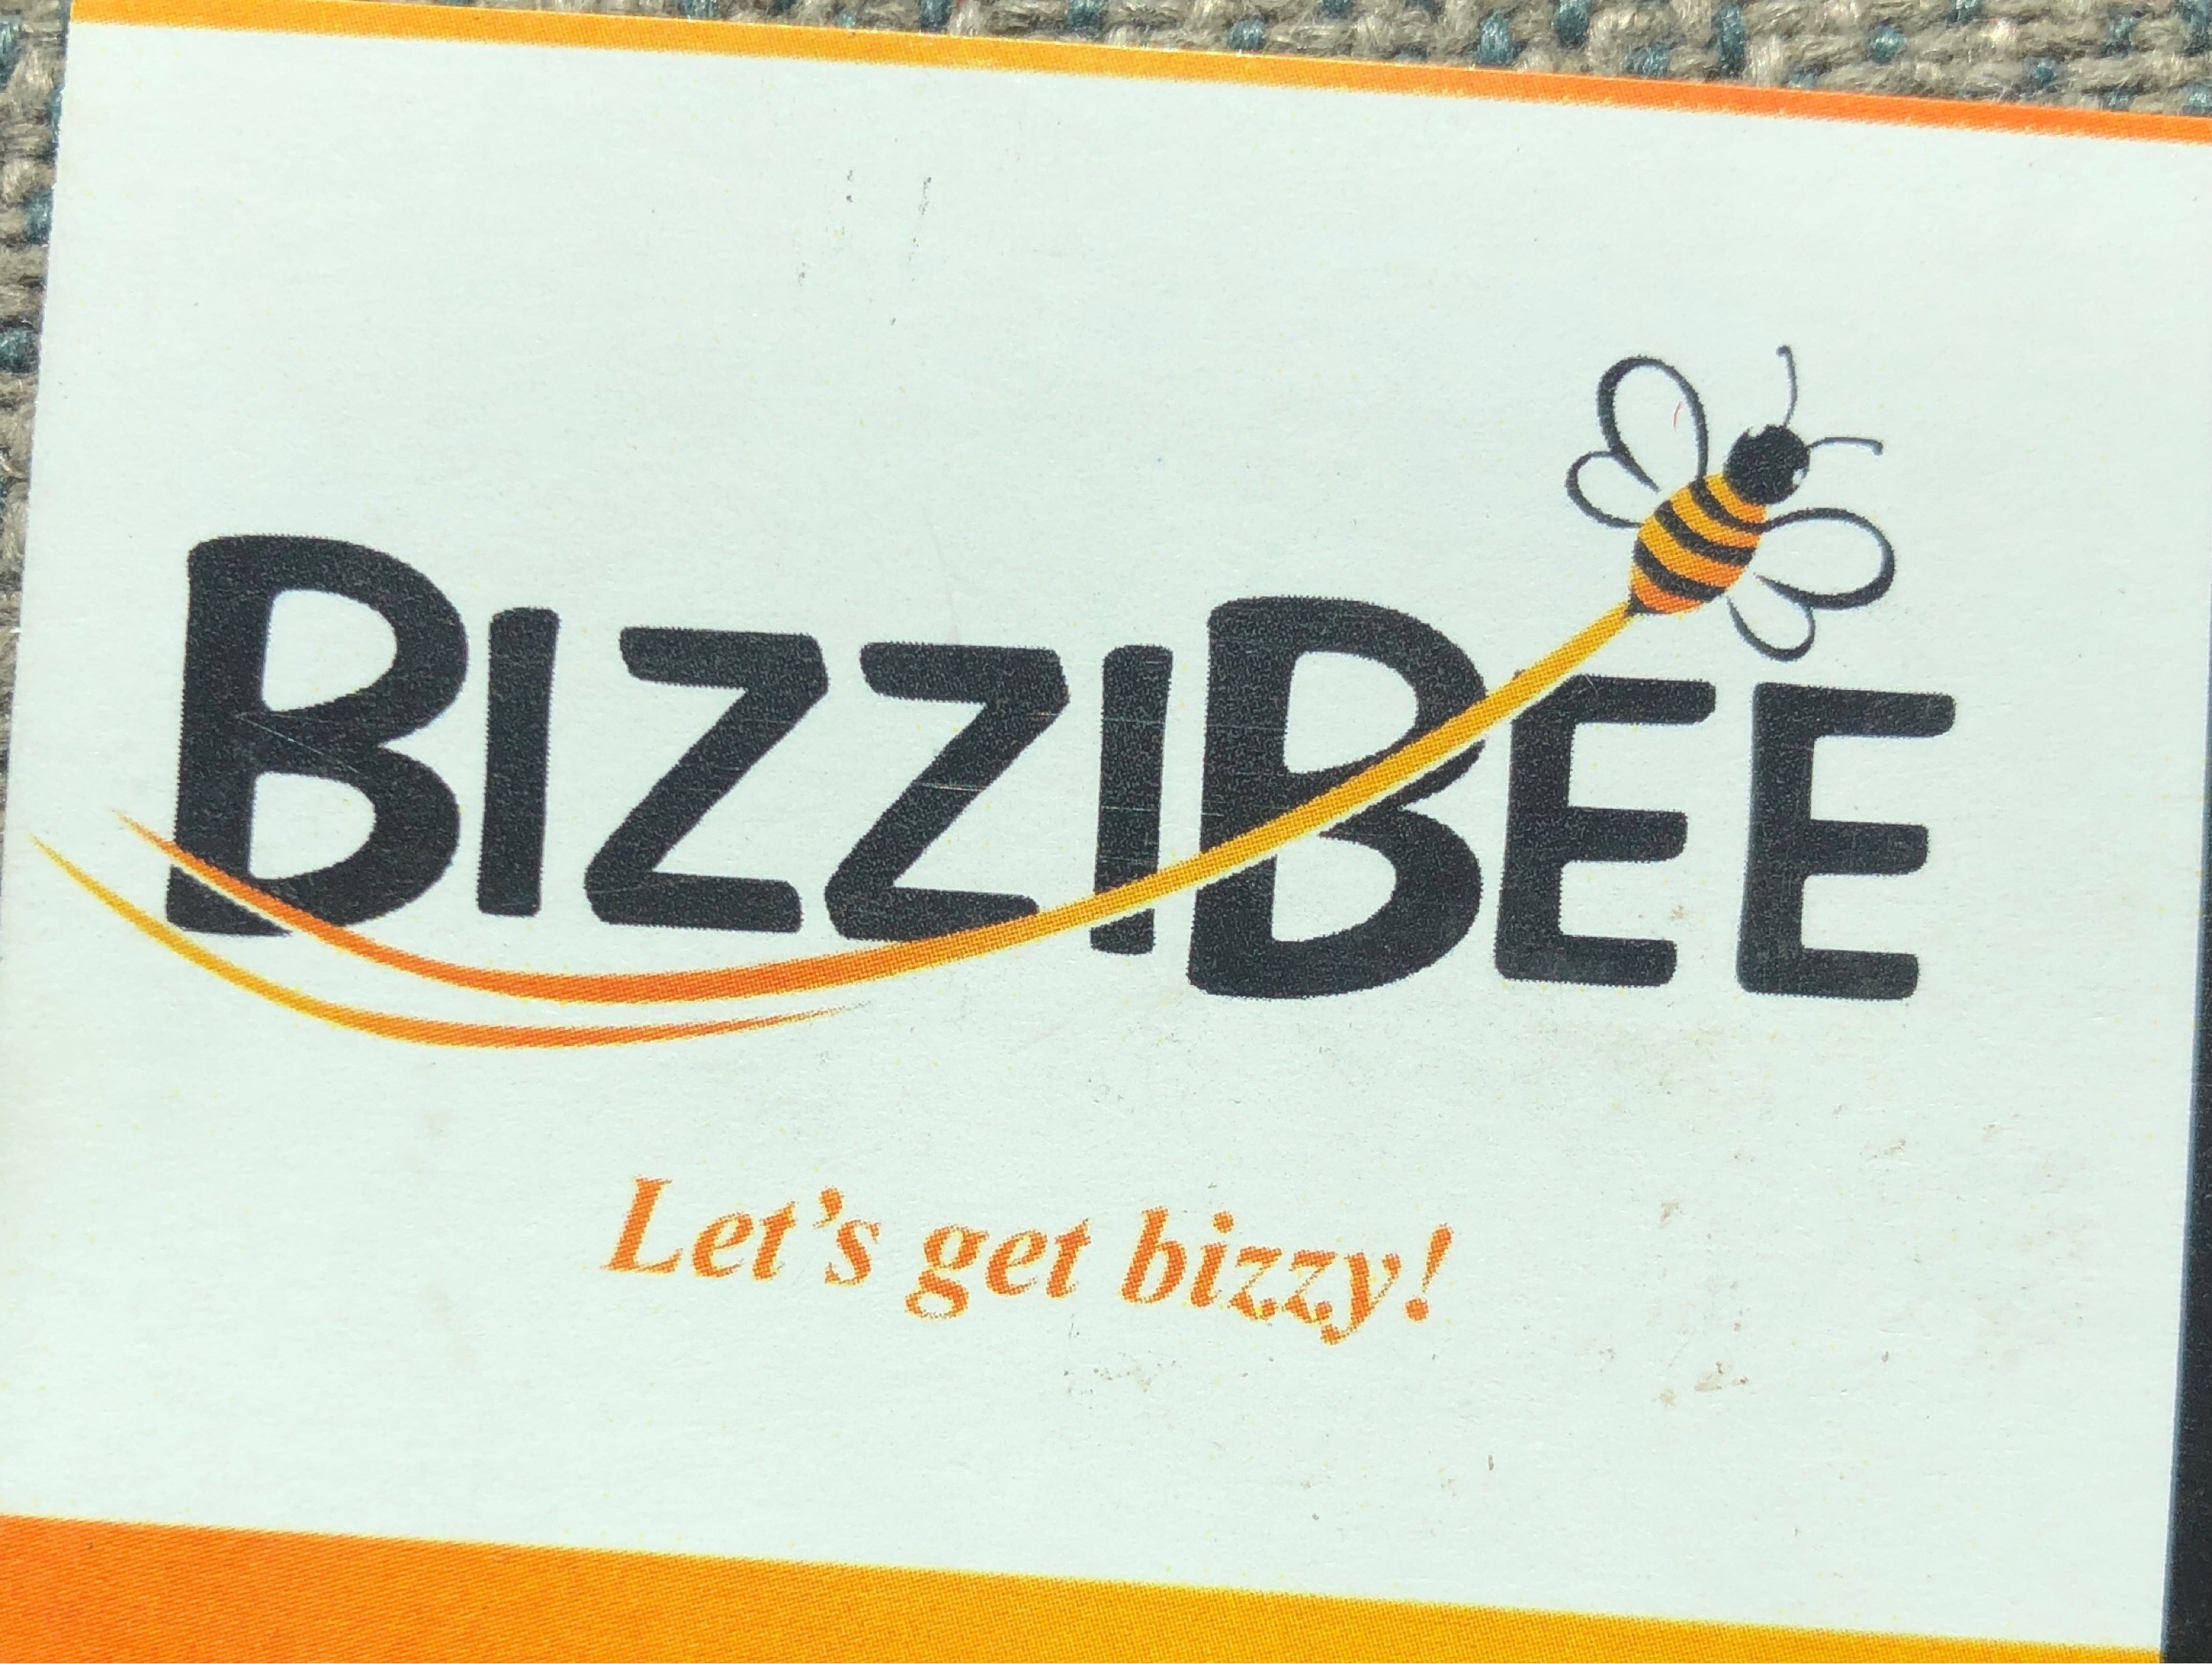 Bizzee Bee - Movers, Demolition Services, Junk Removal & Hauling Logo